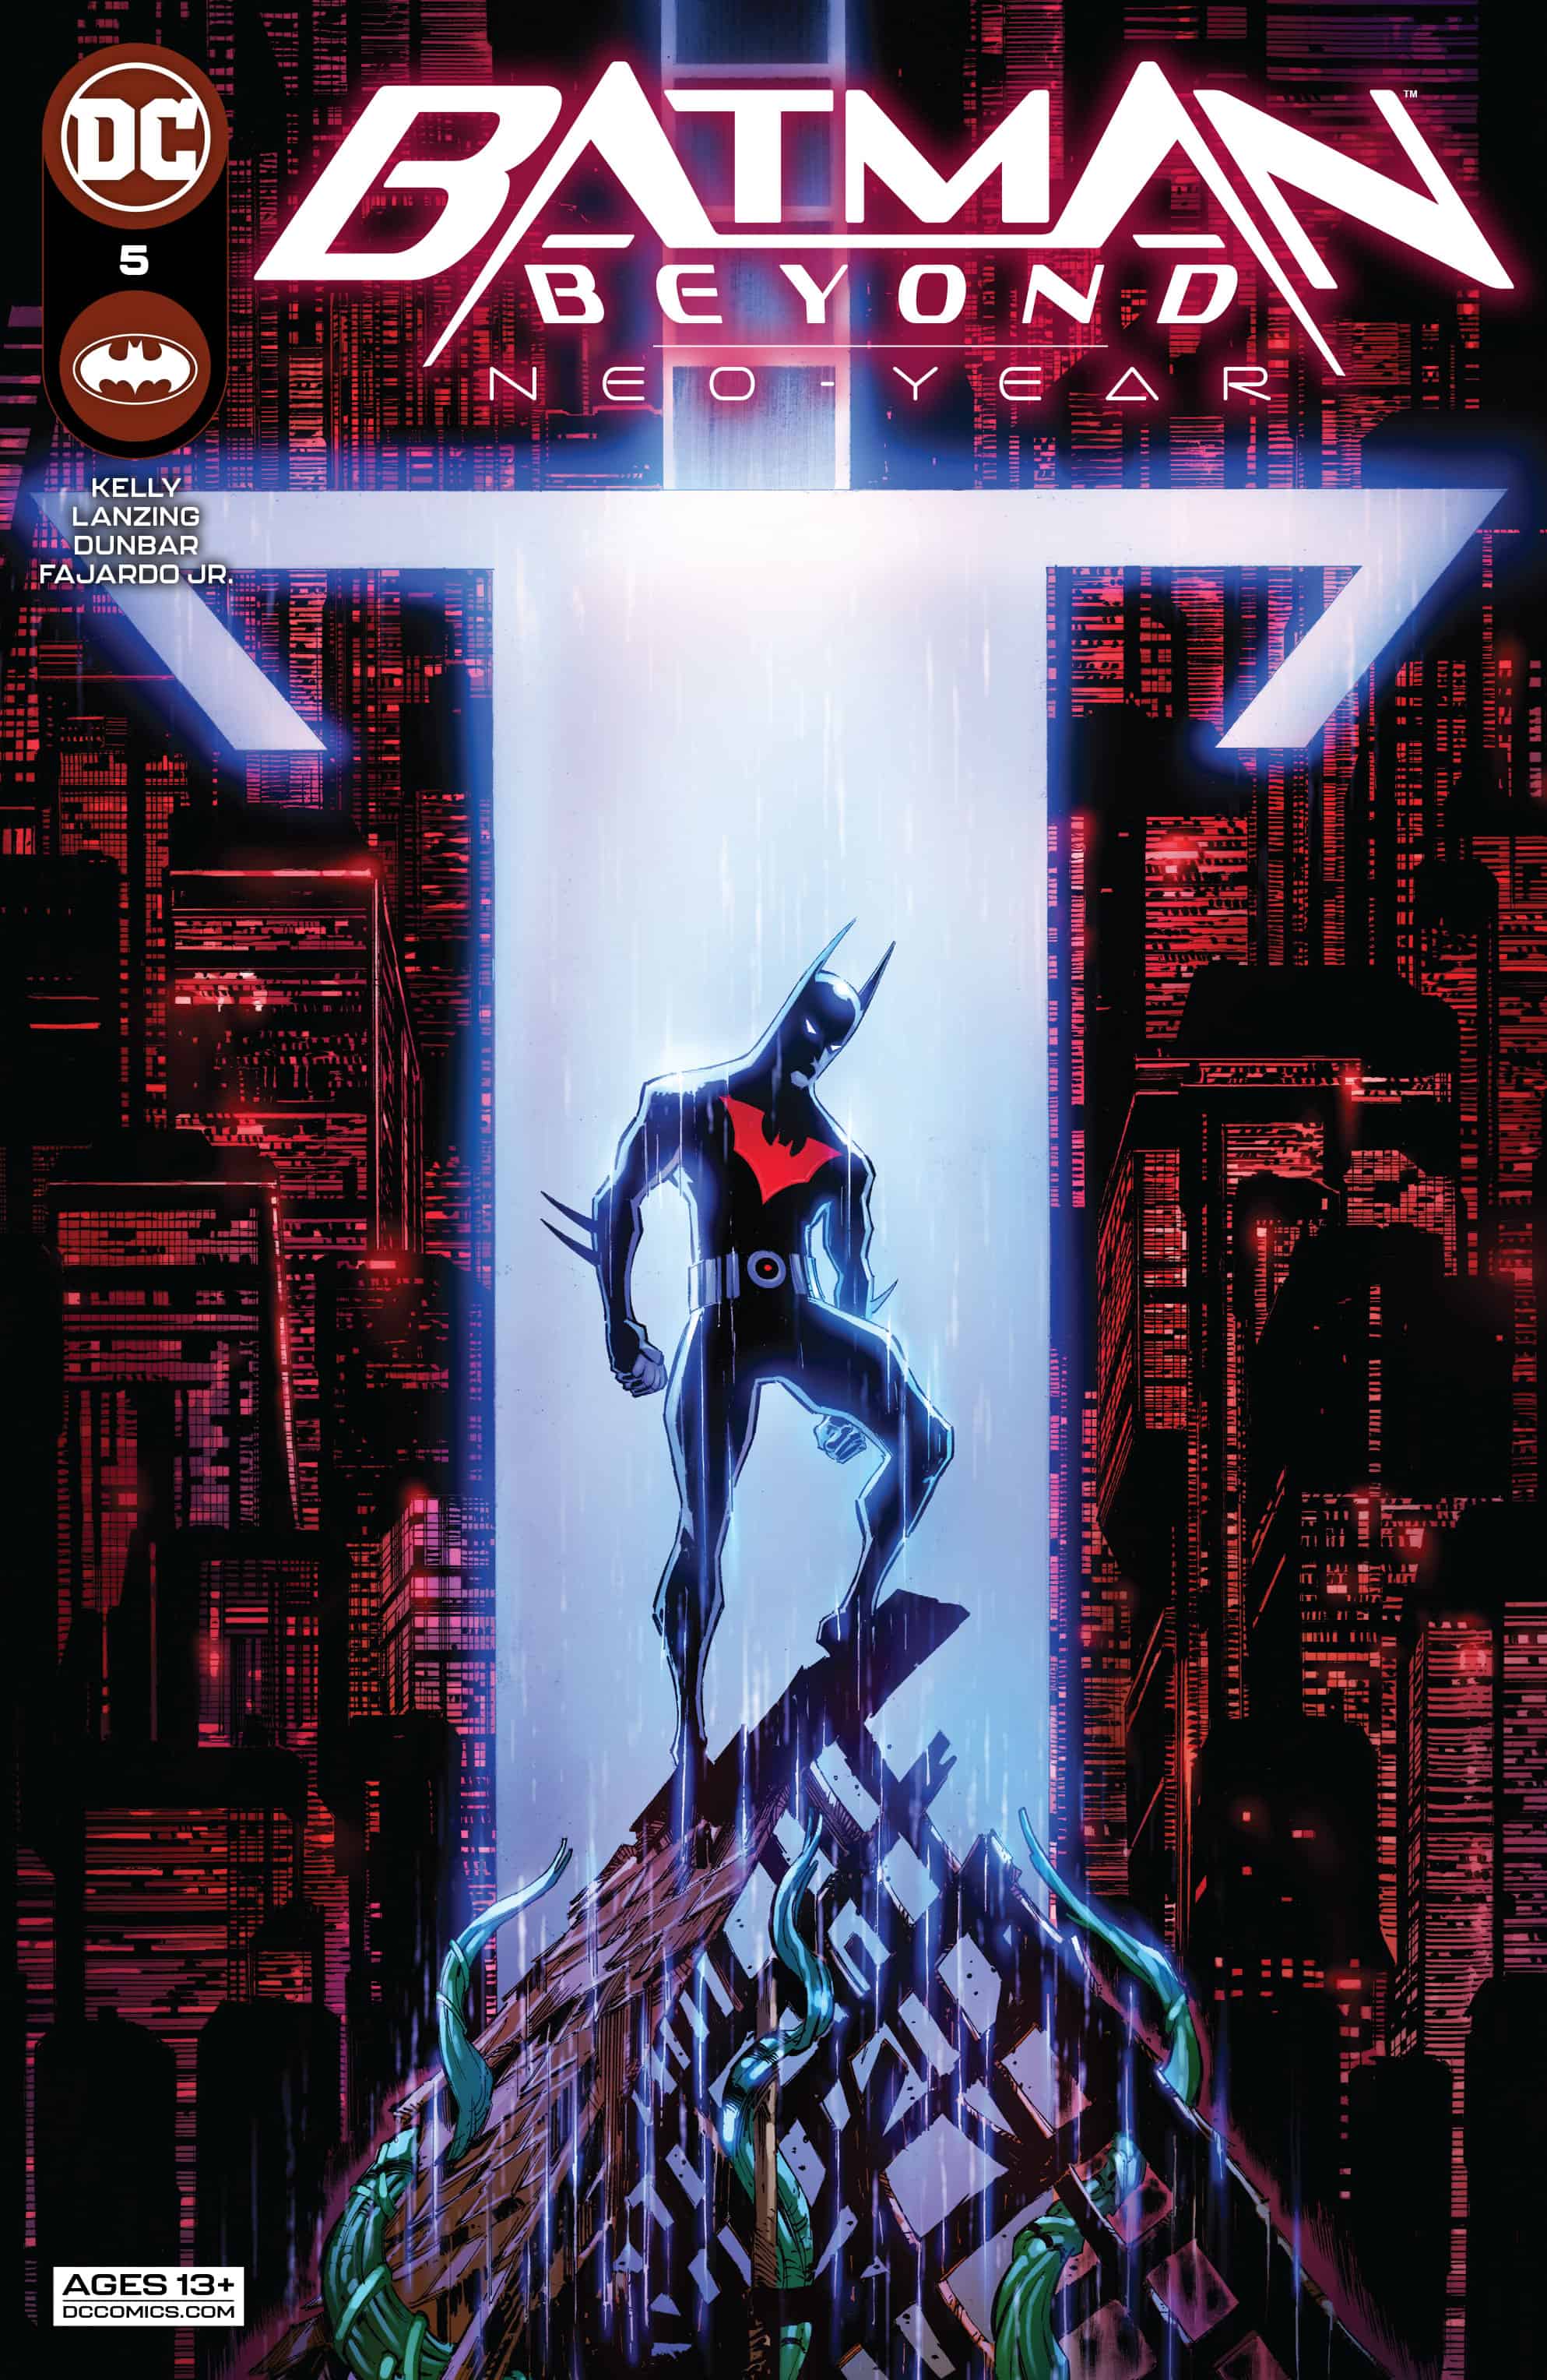 Cover of Batman Beyond Neo Year Issue number 5